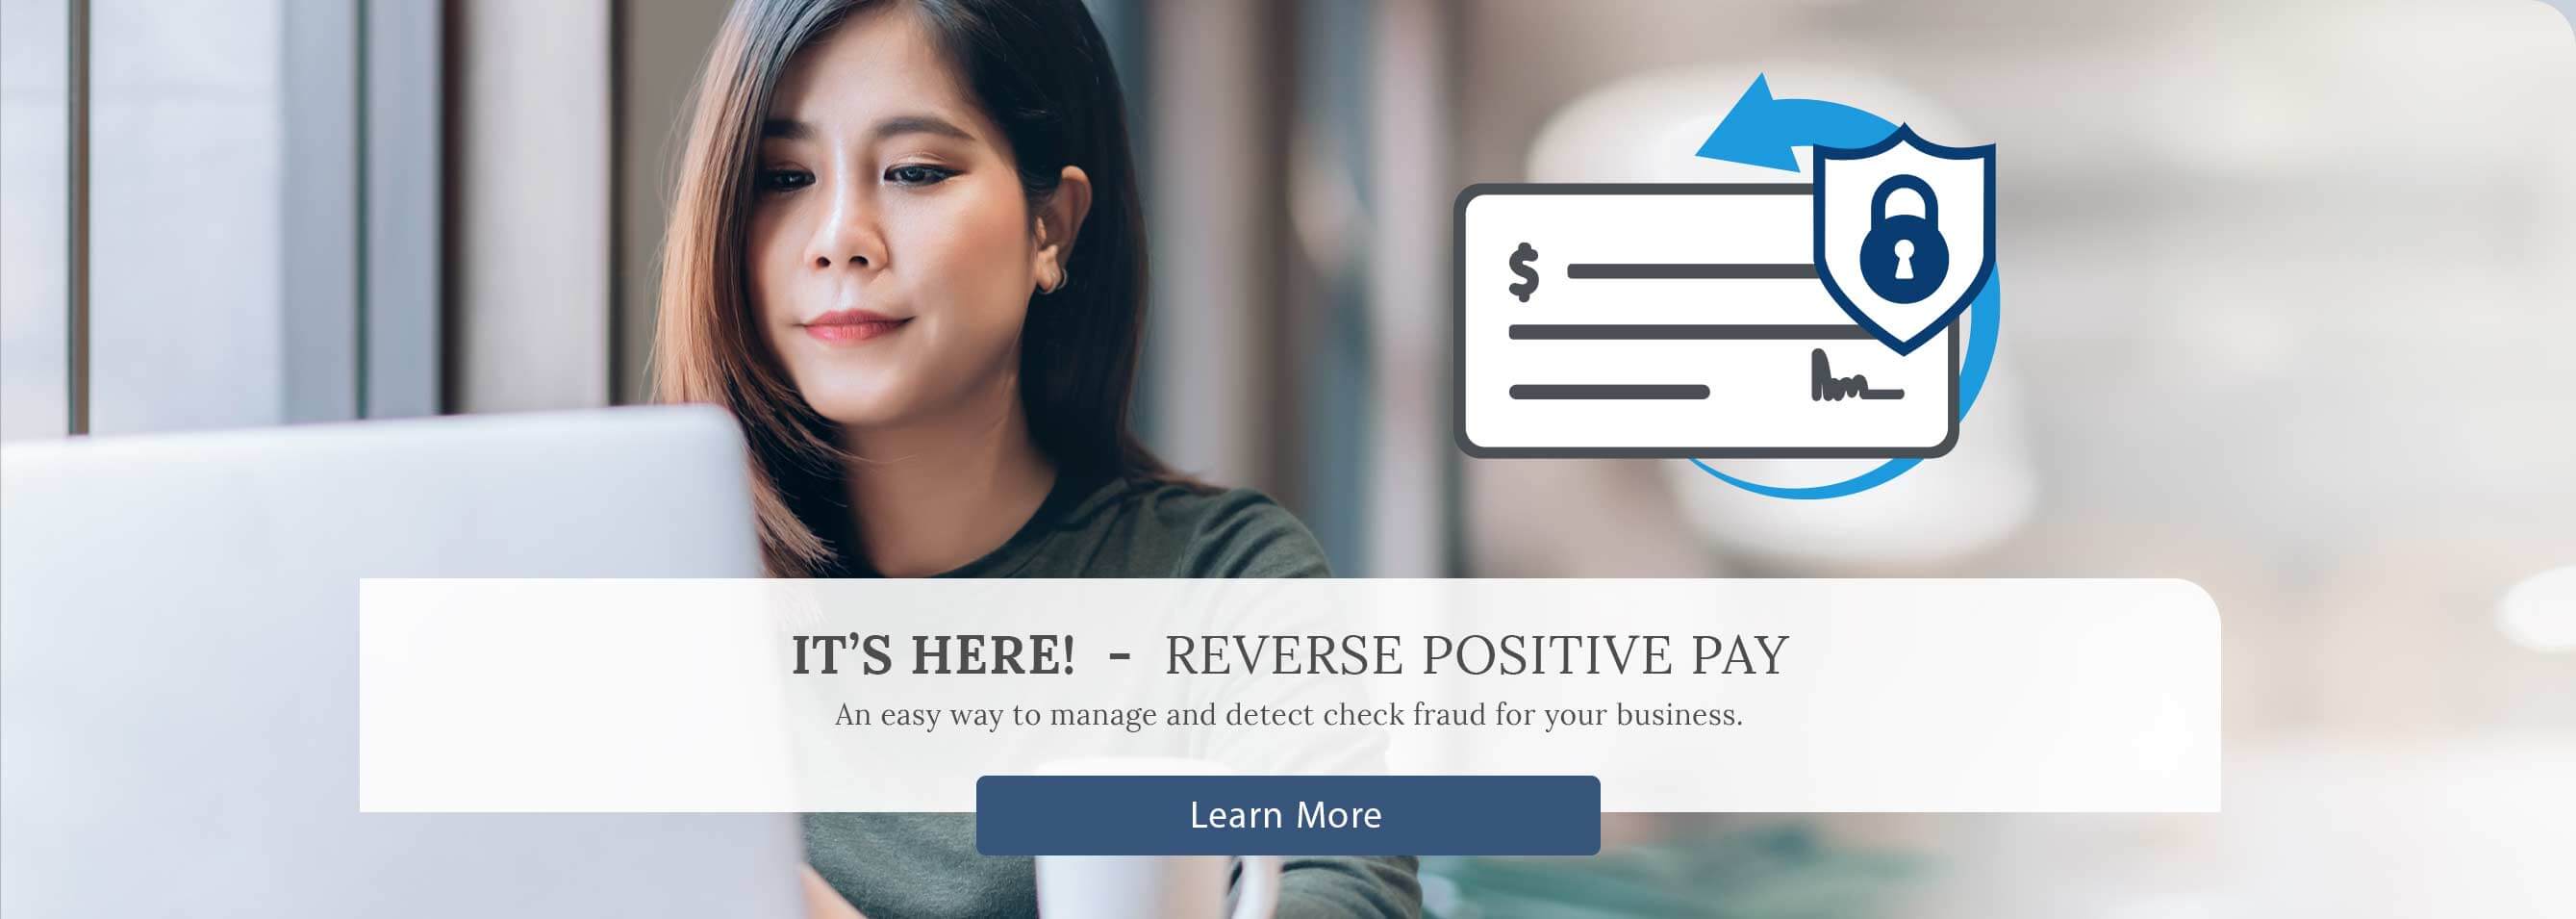 Reverse Positive Pay It's here an easy way to manage and detect check fraud for your business